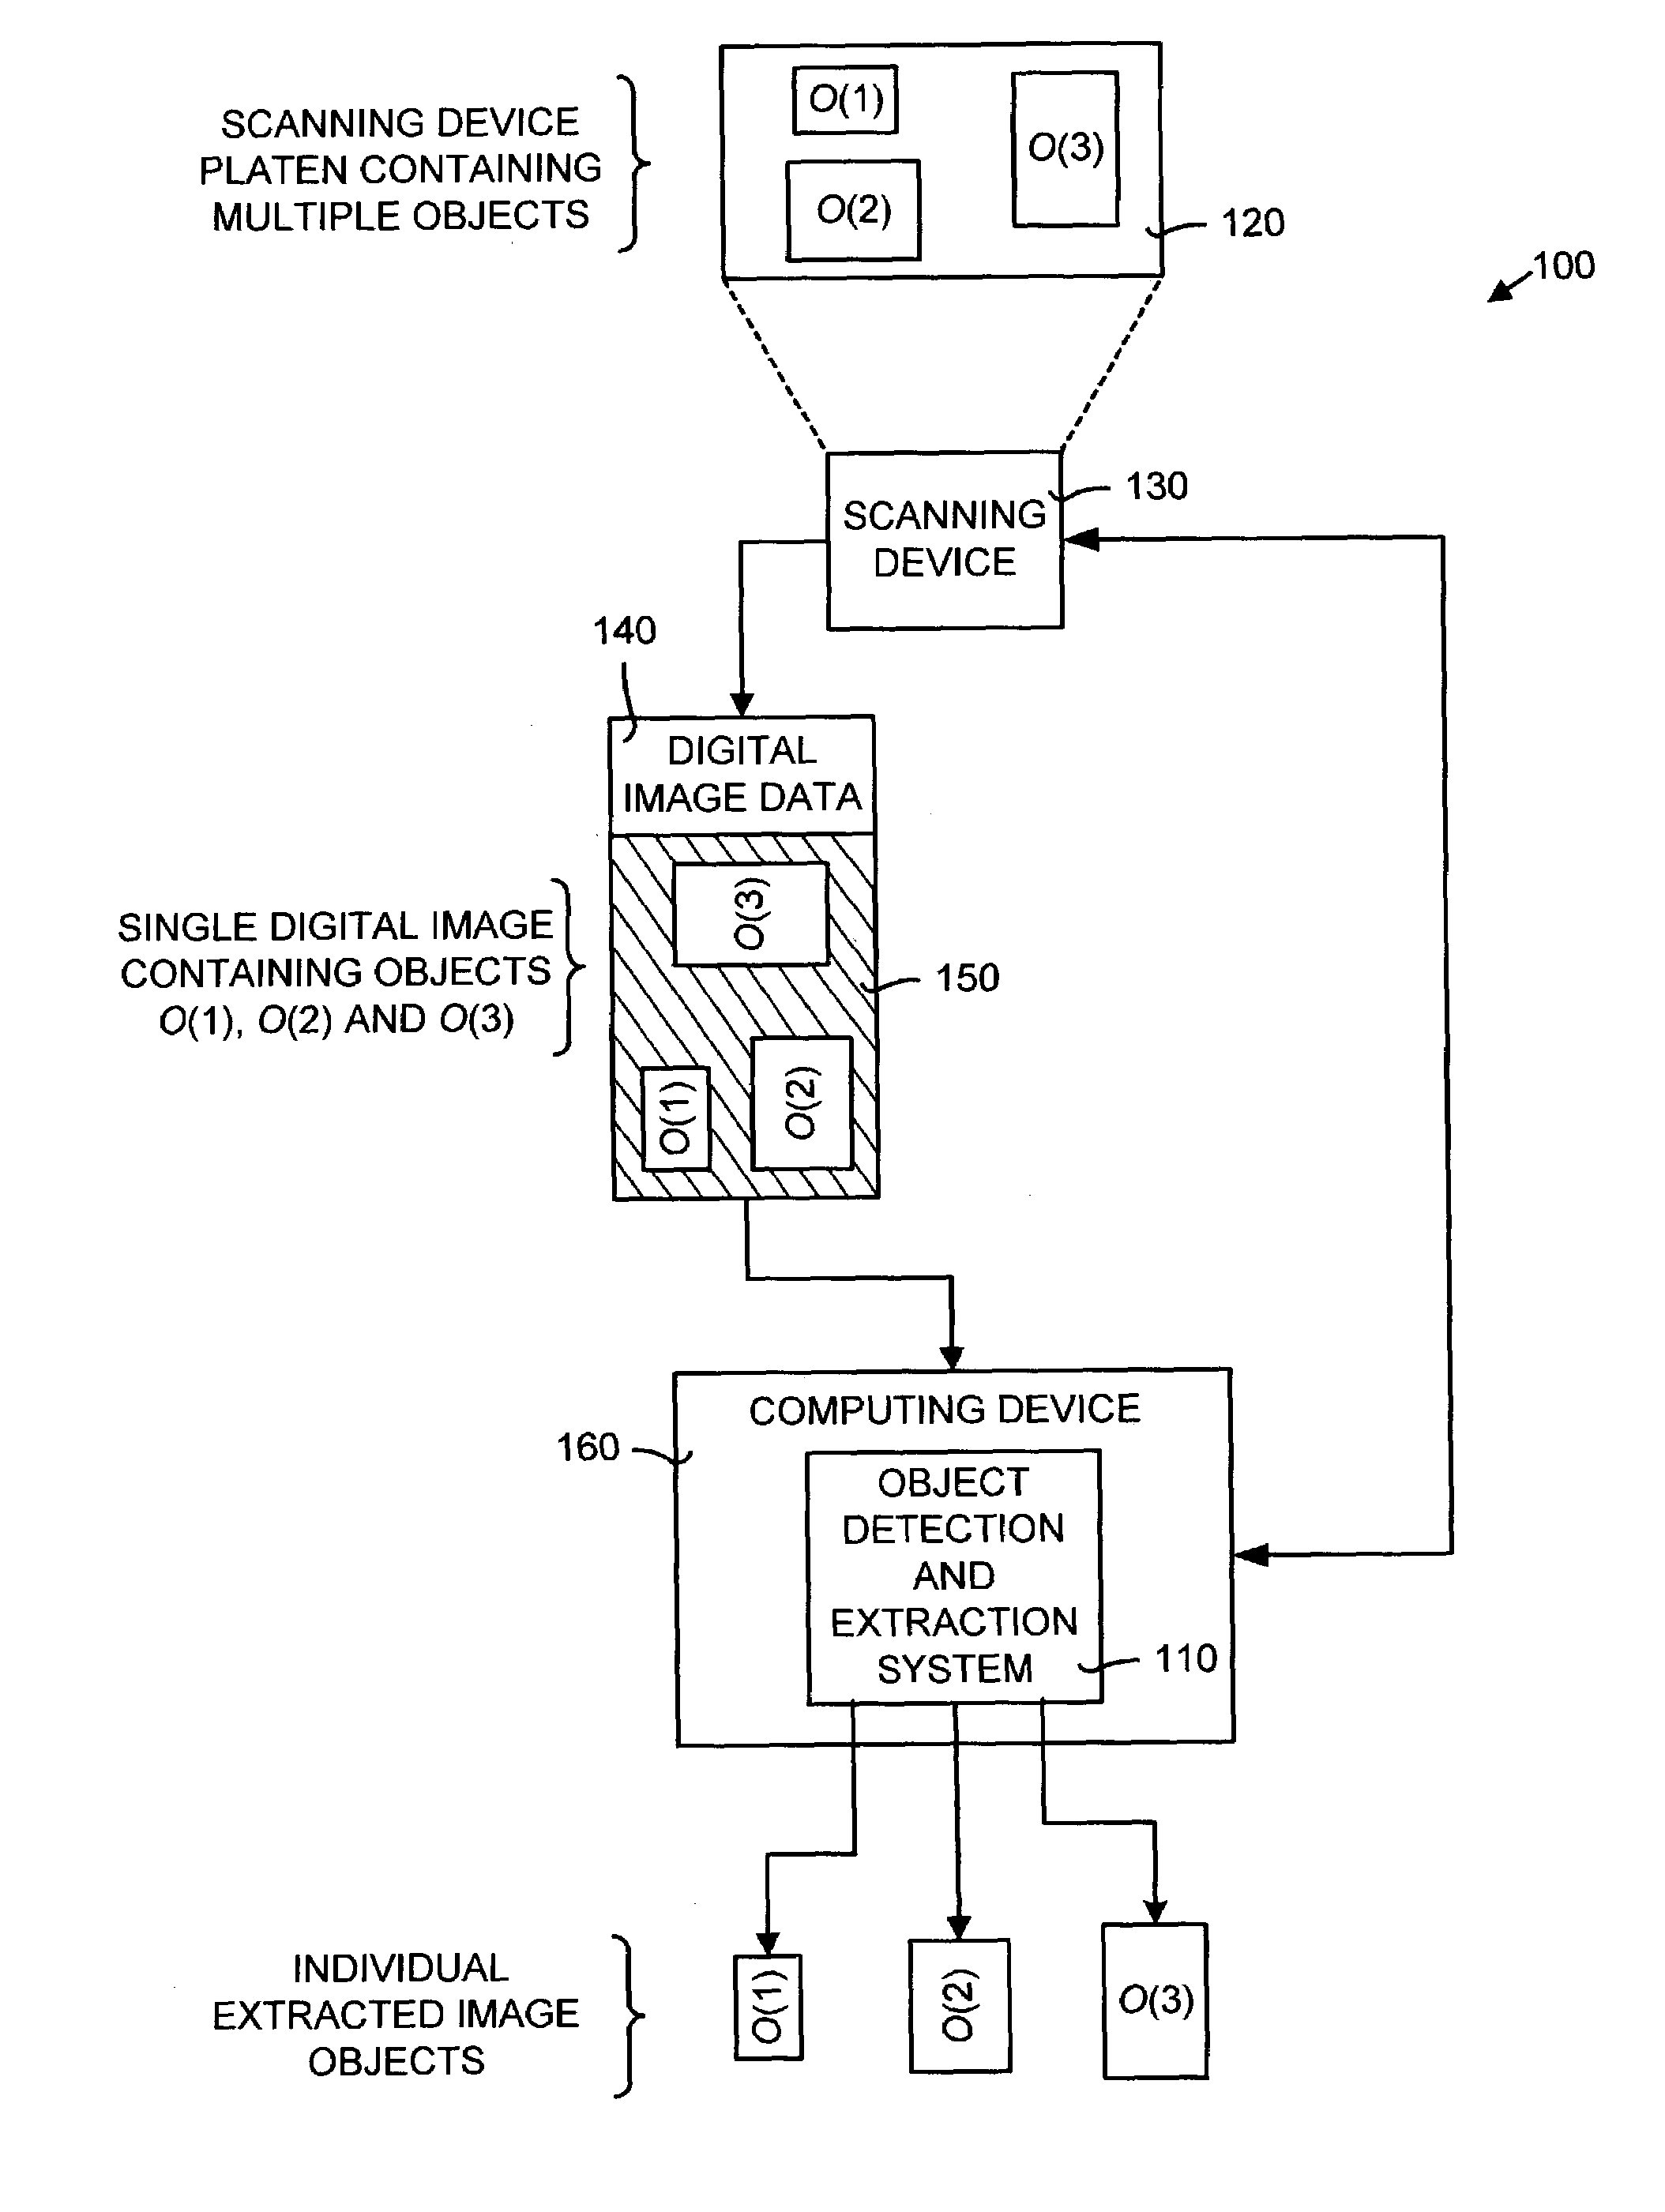 System and method for automatically detecting and extracting objects in digital image data